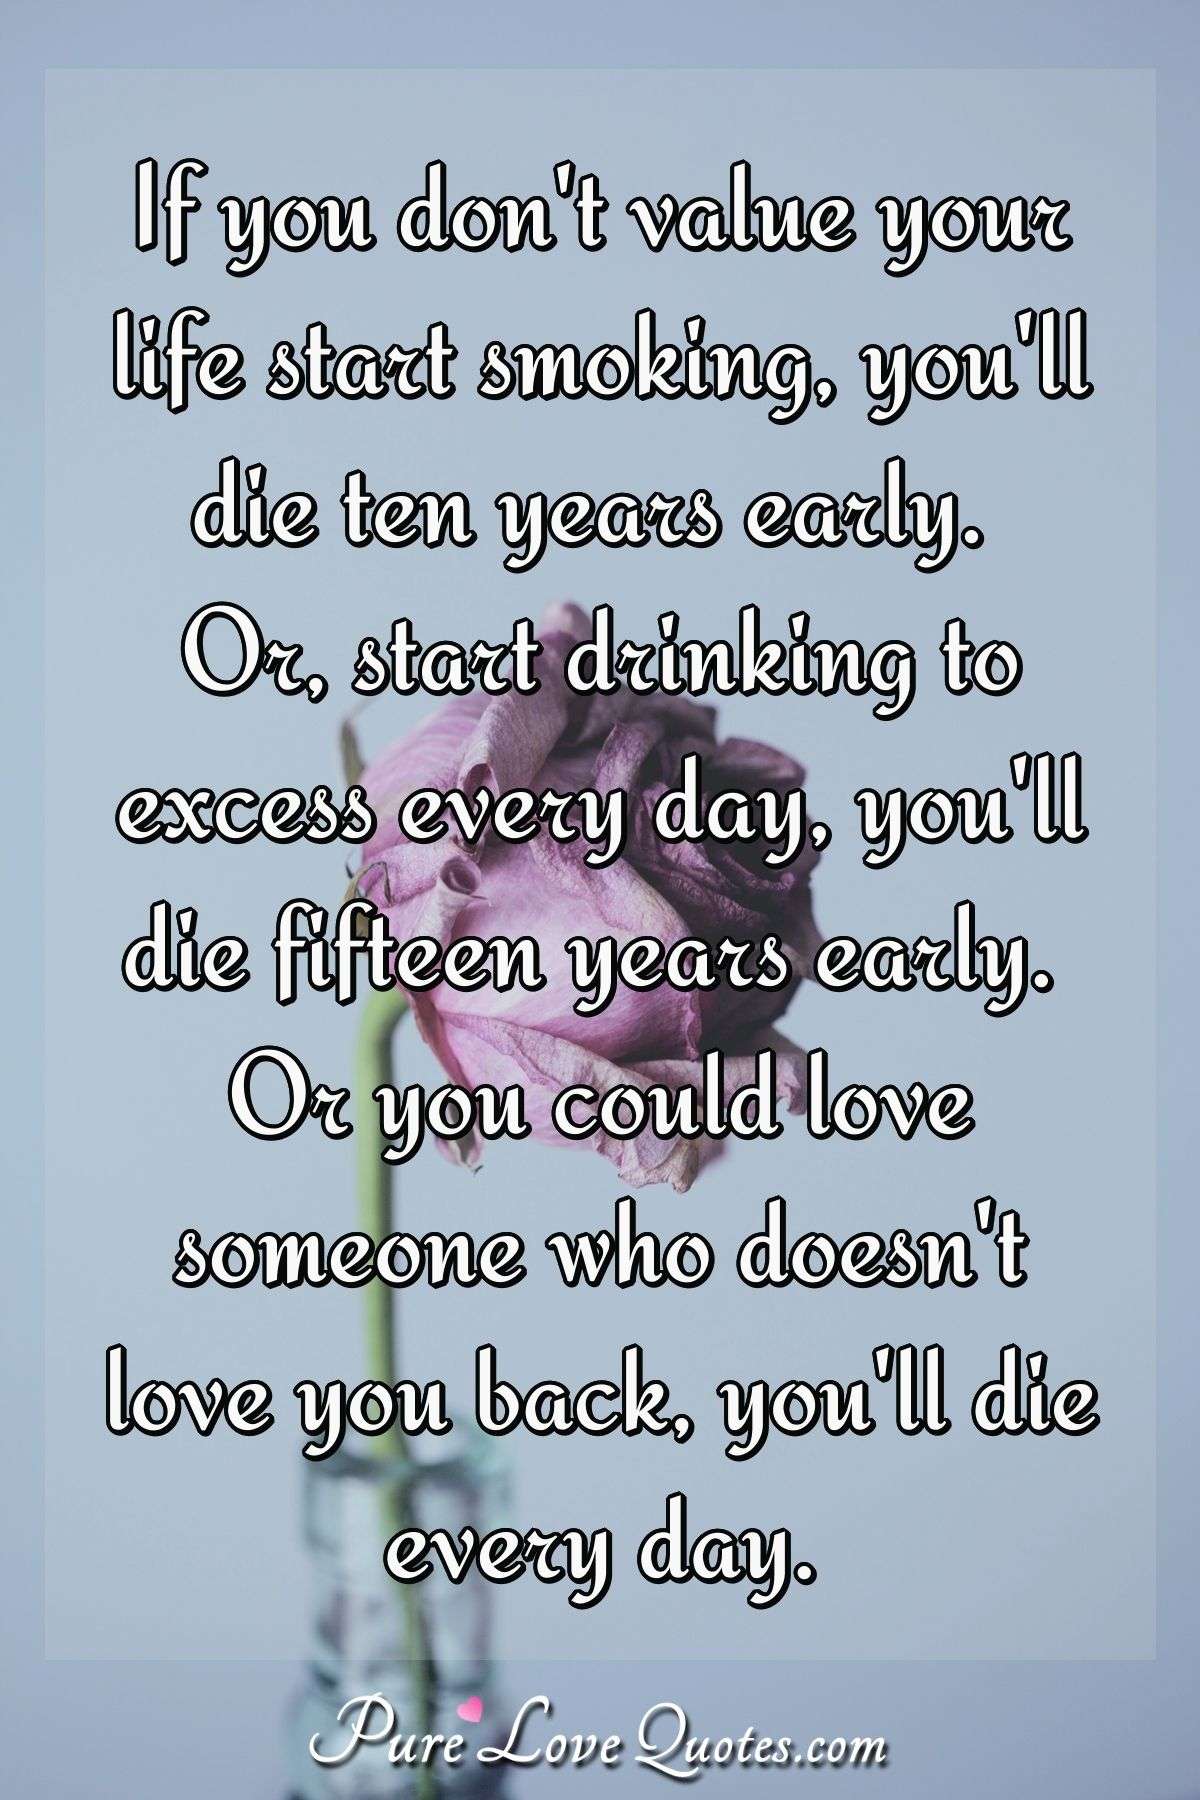 If you don't value your life start smoking, you'll die ten years early. Or, start drinking to excess every day, you'll die fifteen years early. Or you could love someone who doesn't love you back, you'll die every day. - Anonymous